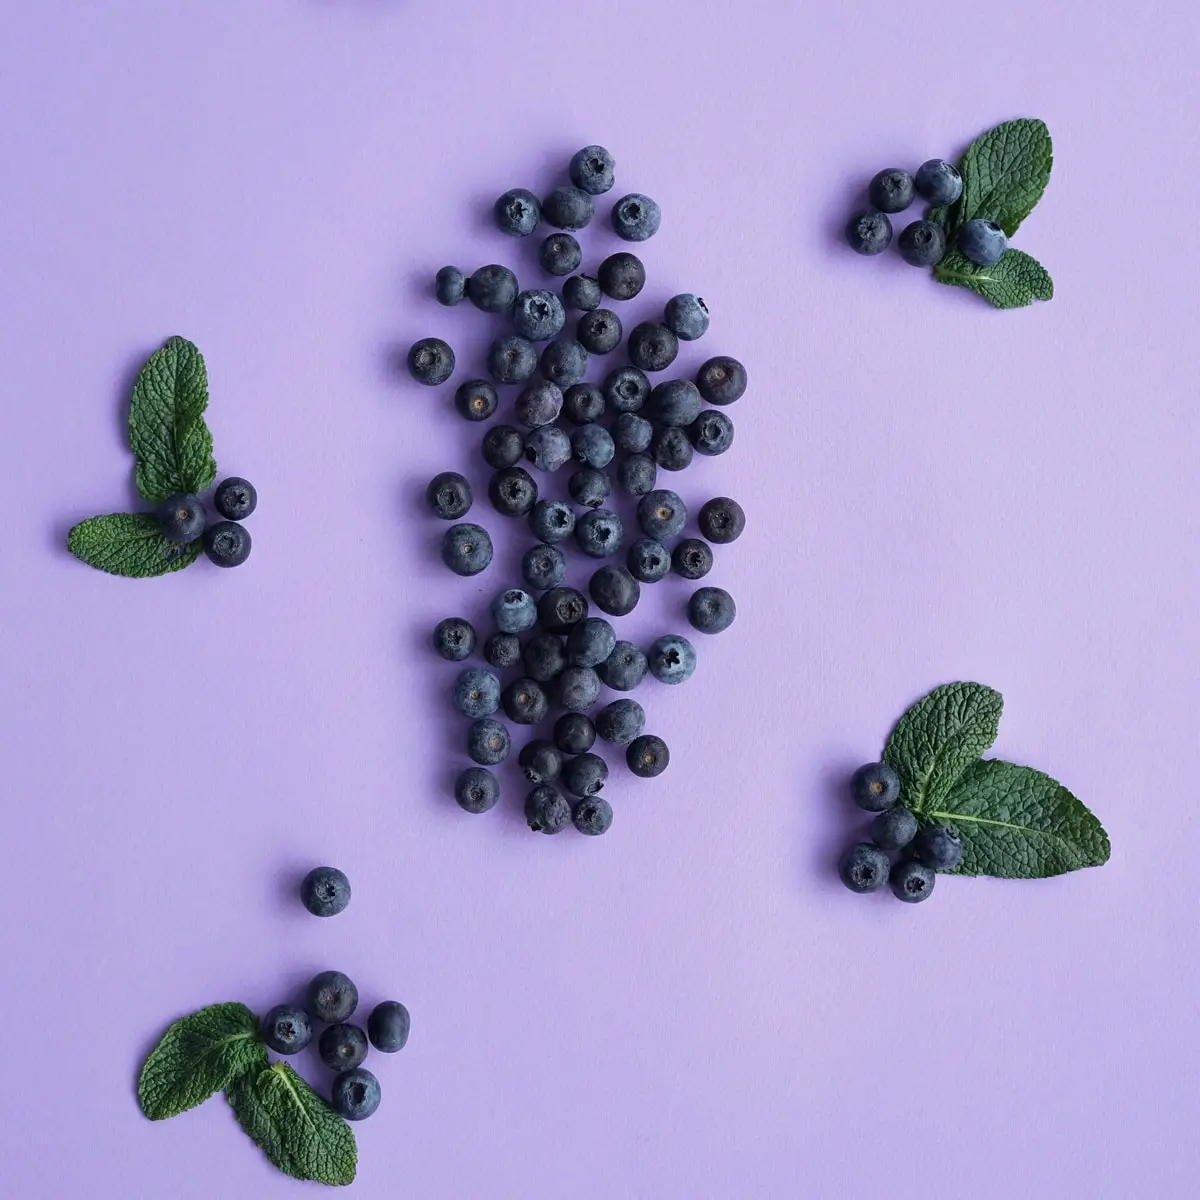 Foods with blueberries